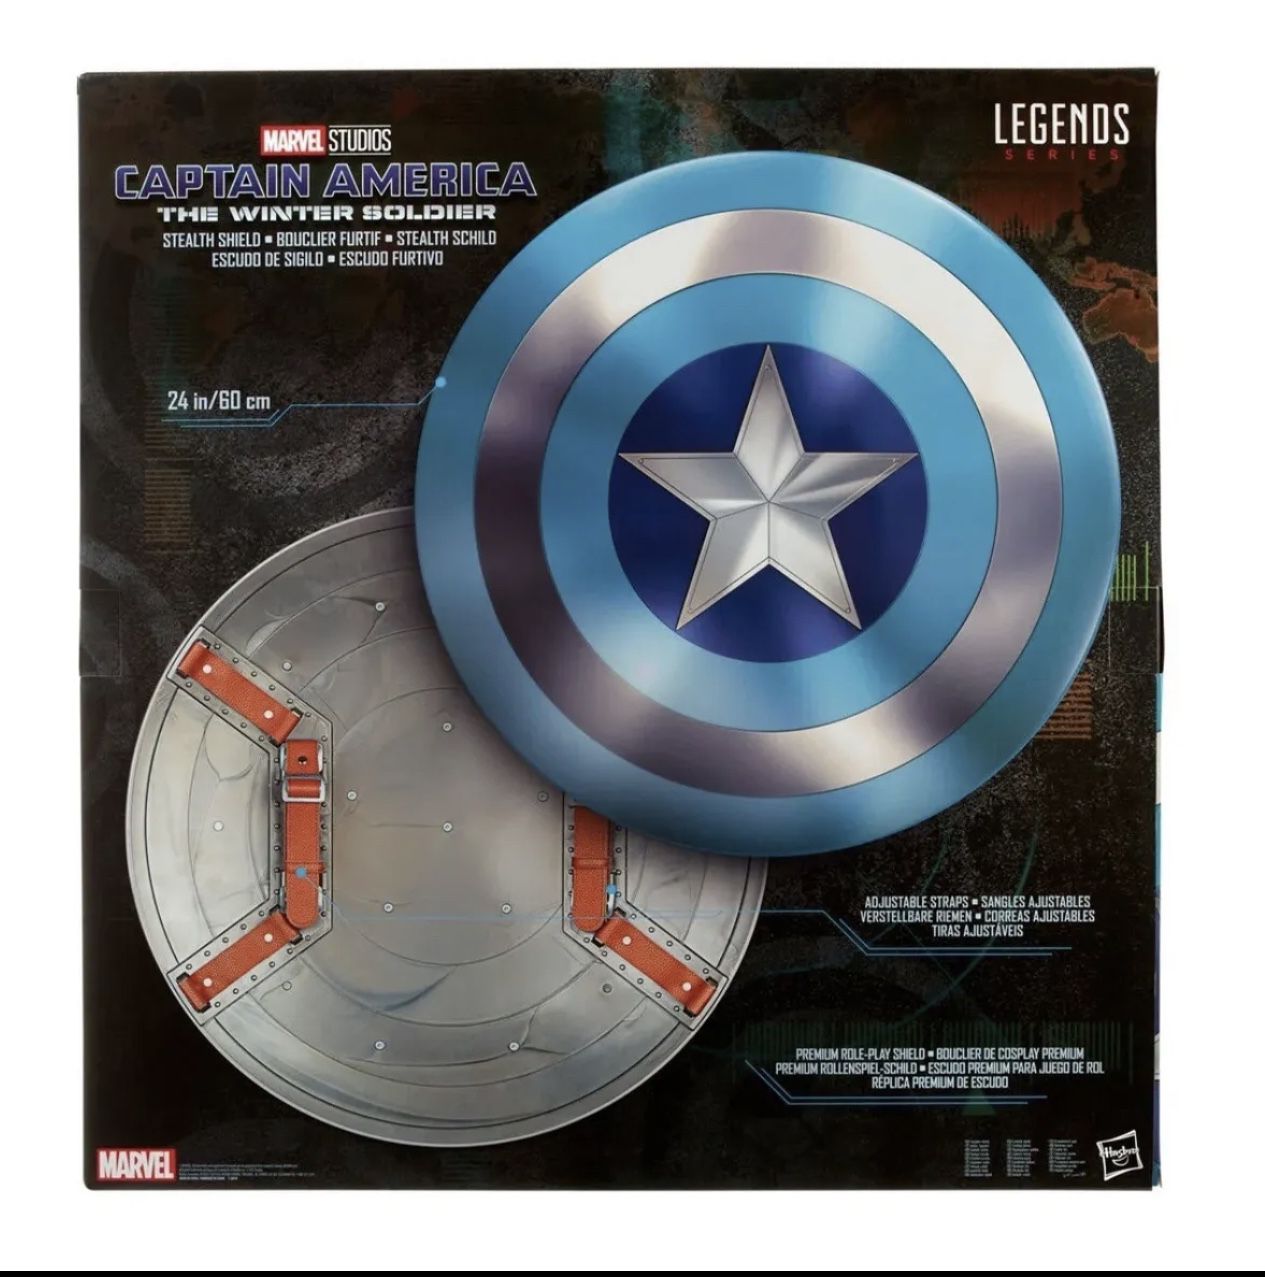 Marvel Legends Series Captain America: Winter Soldier Stealth Shield by Hasbro